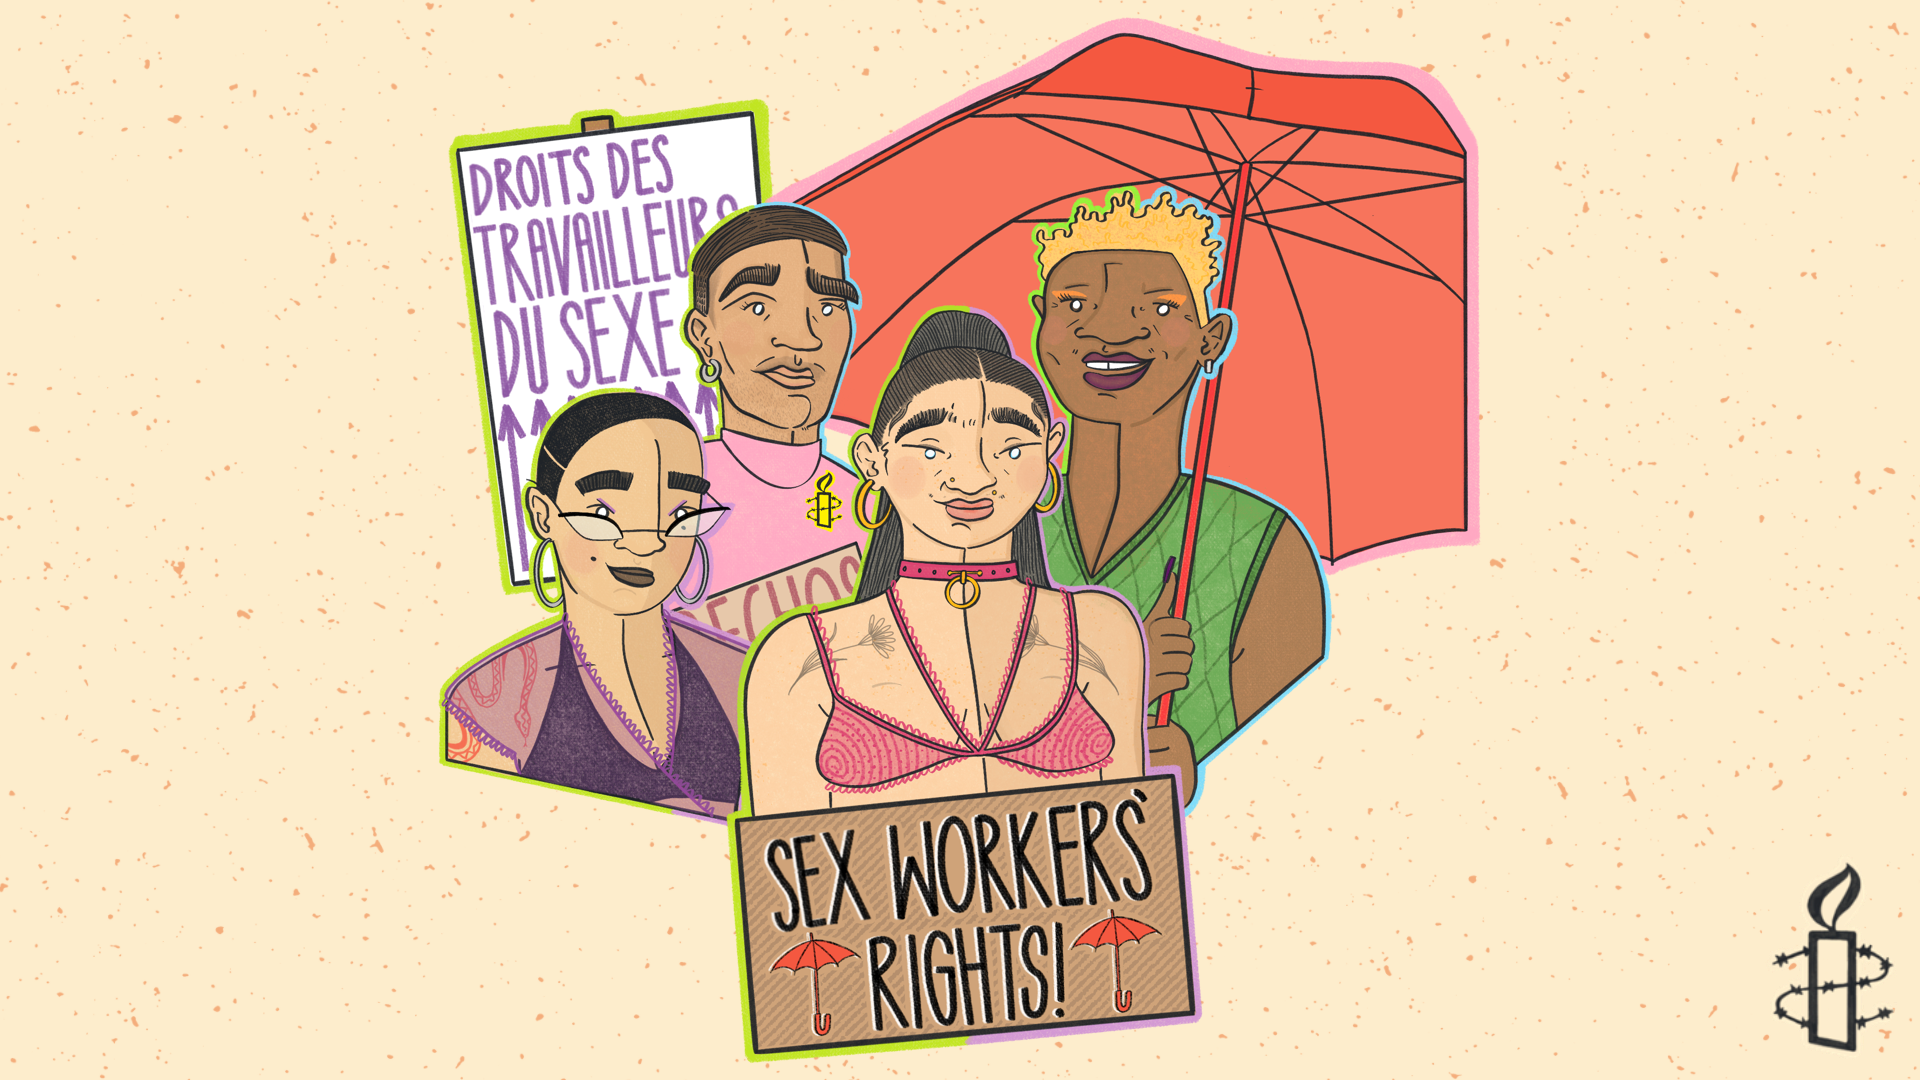 Ireland: Laws criminalising sex work are facilitating the targeting and abuse of sex workers 